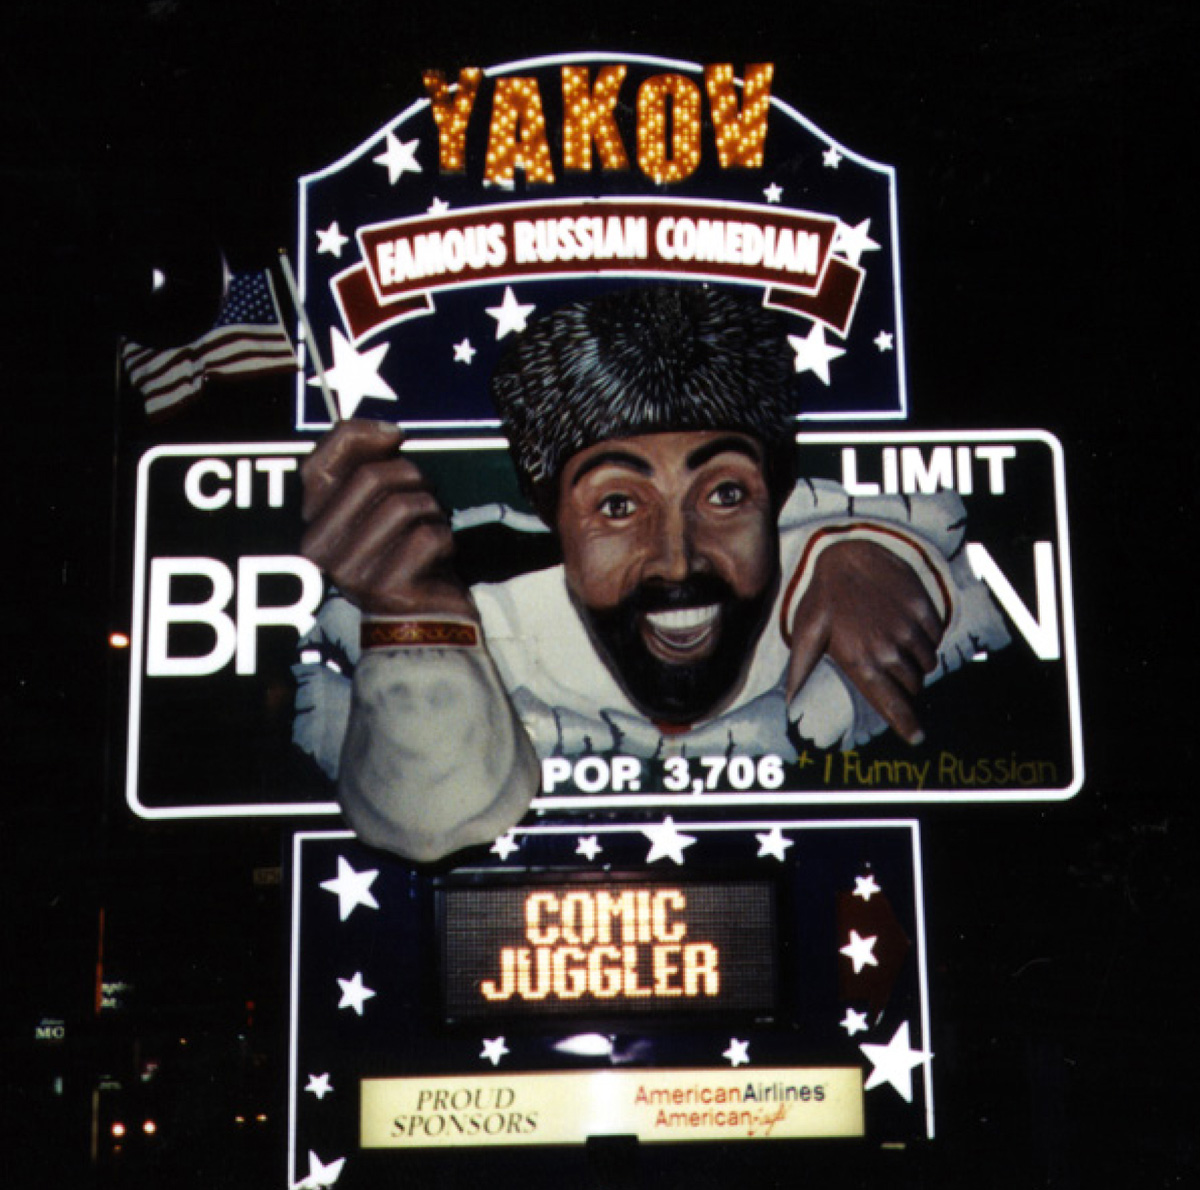 A photograph of a lighted sign in Las Vegas advertising a show by the comedian Yakov Smirnoff.